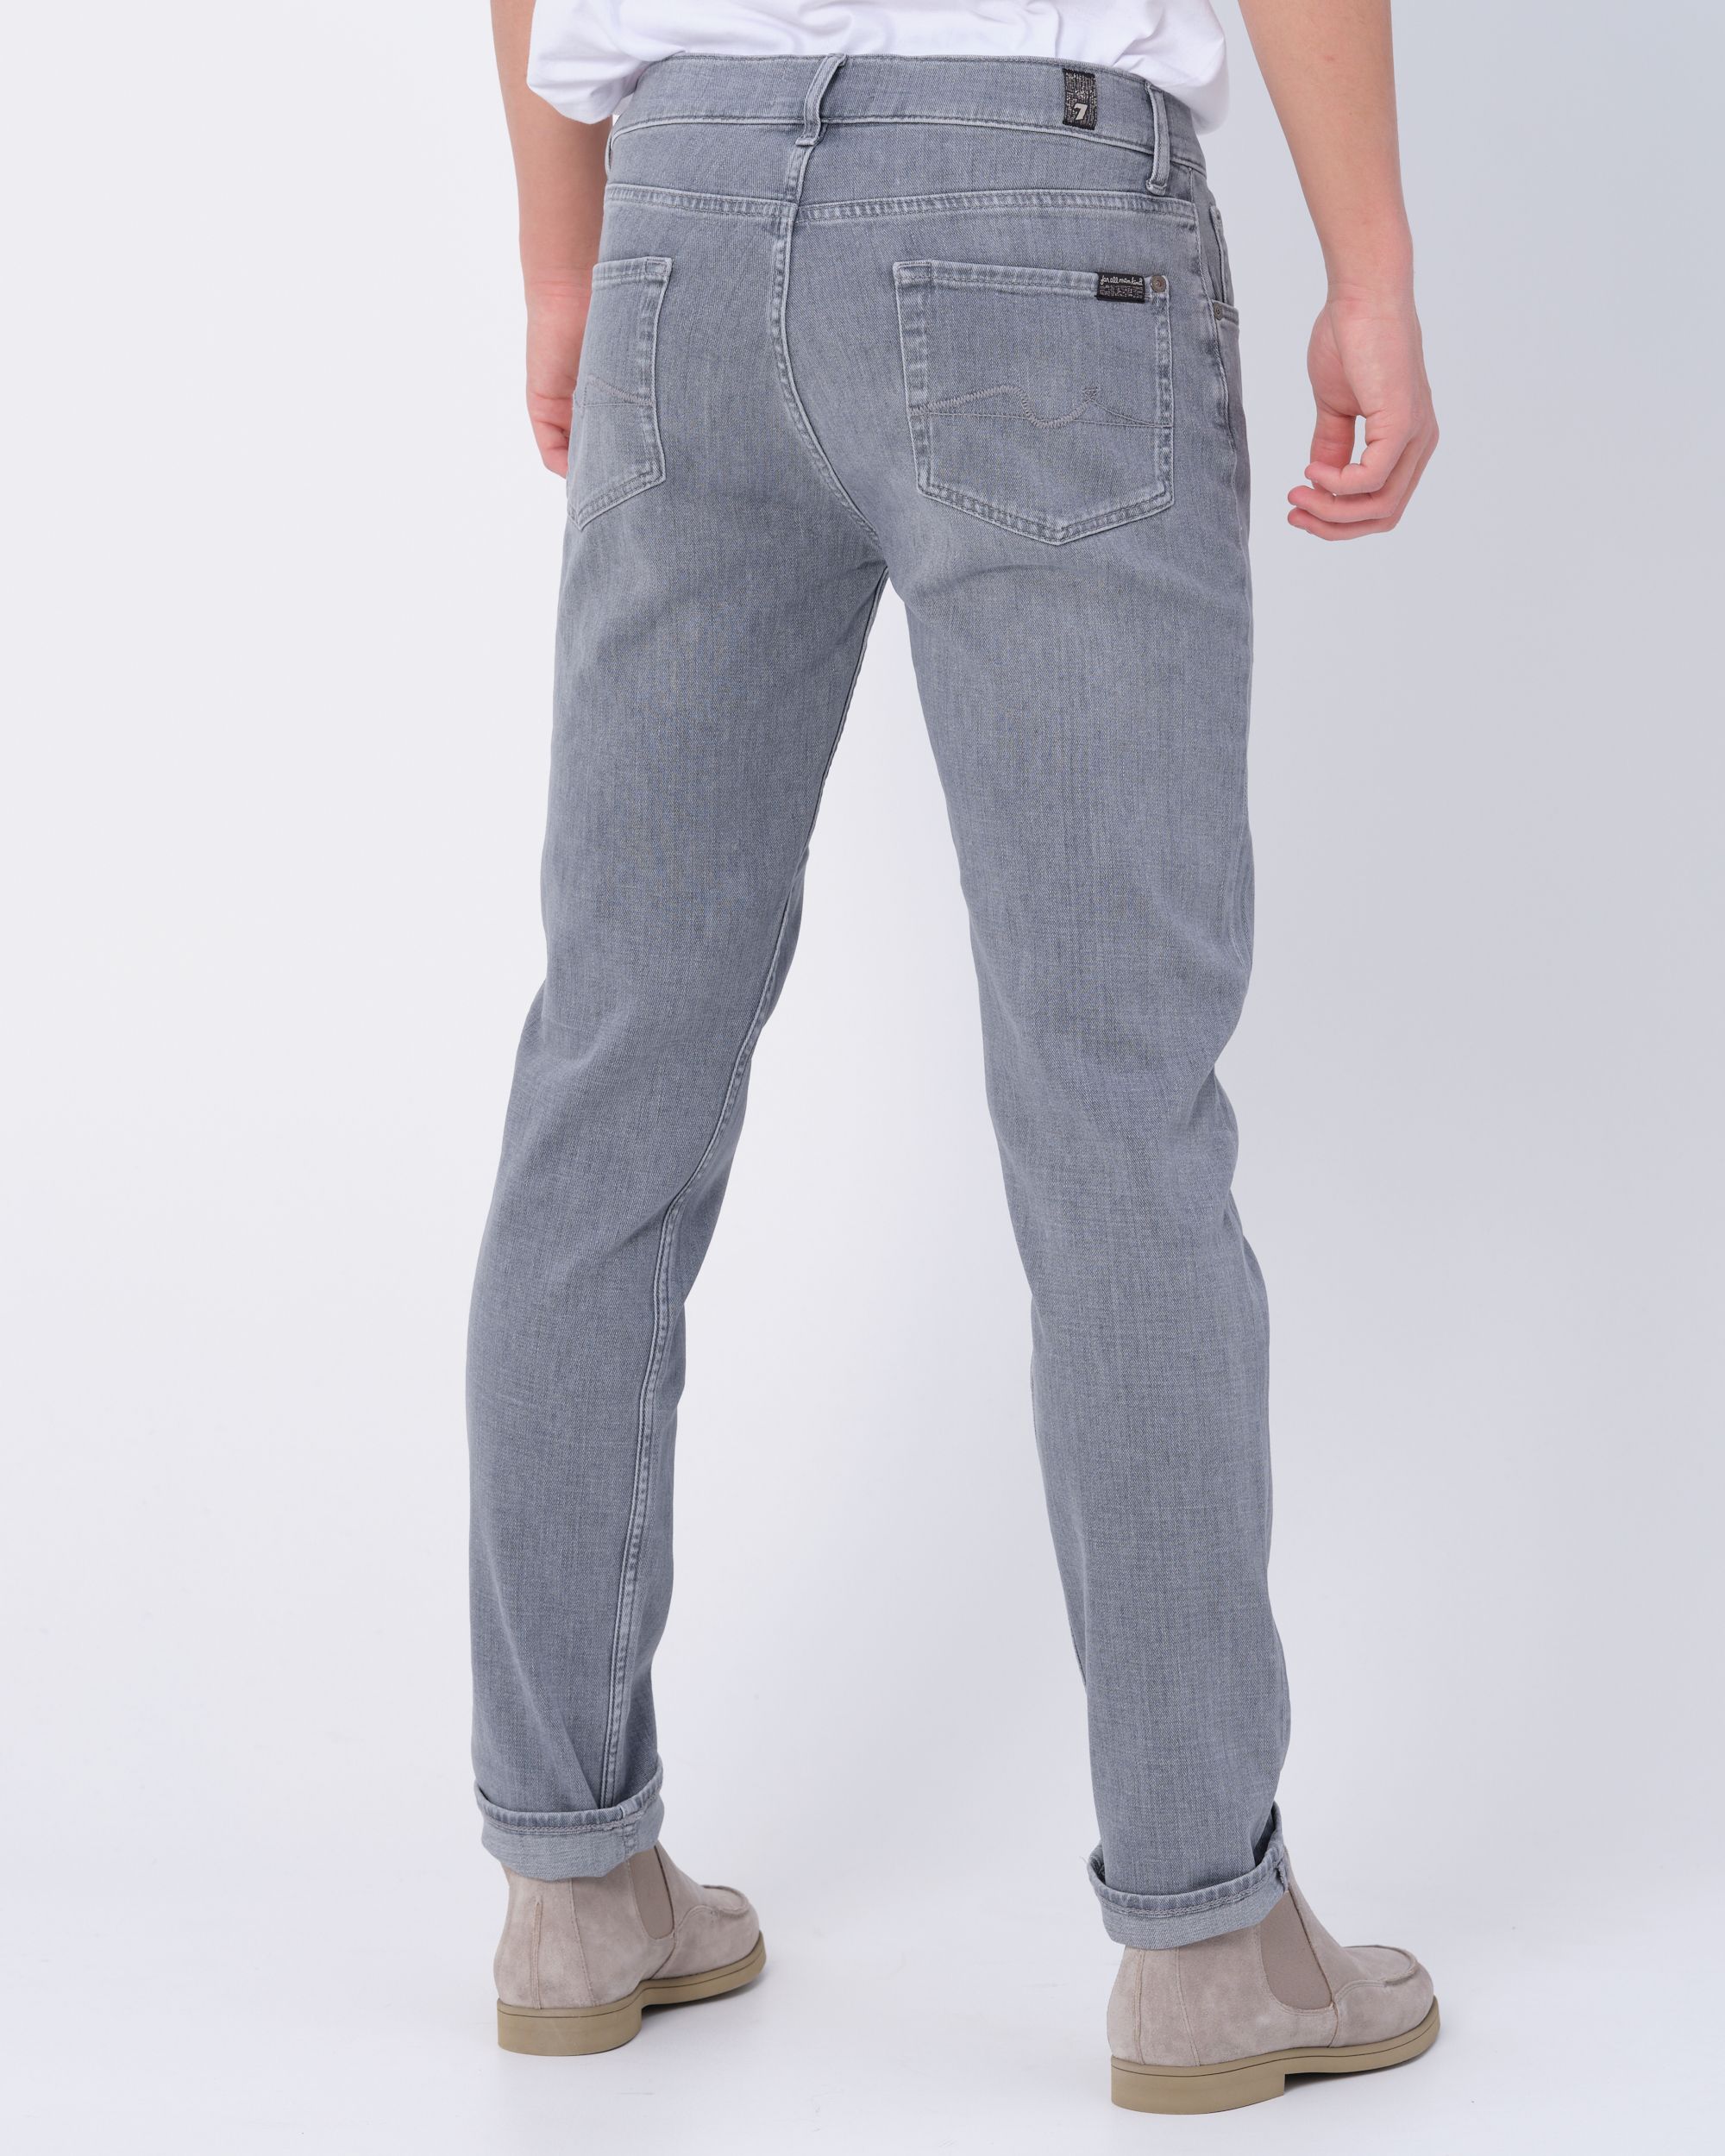 Seven for all mankind Jeans Licht grijs 083798-001-30